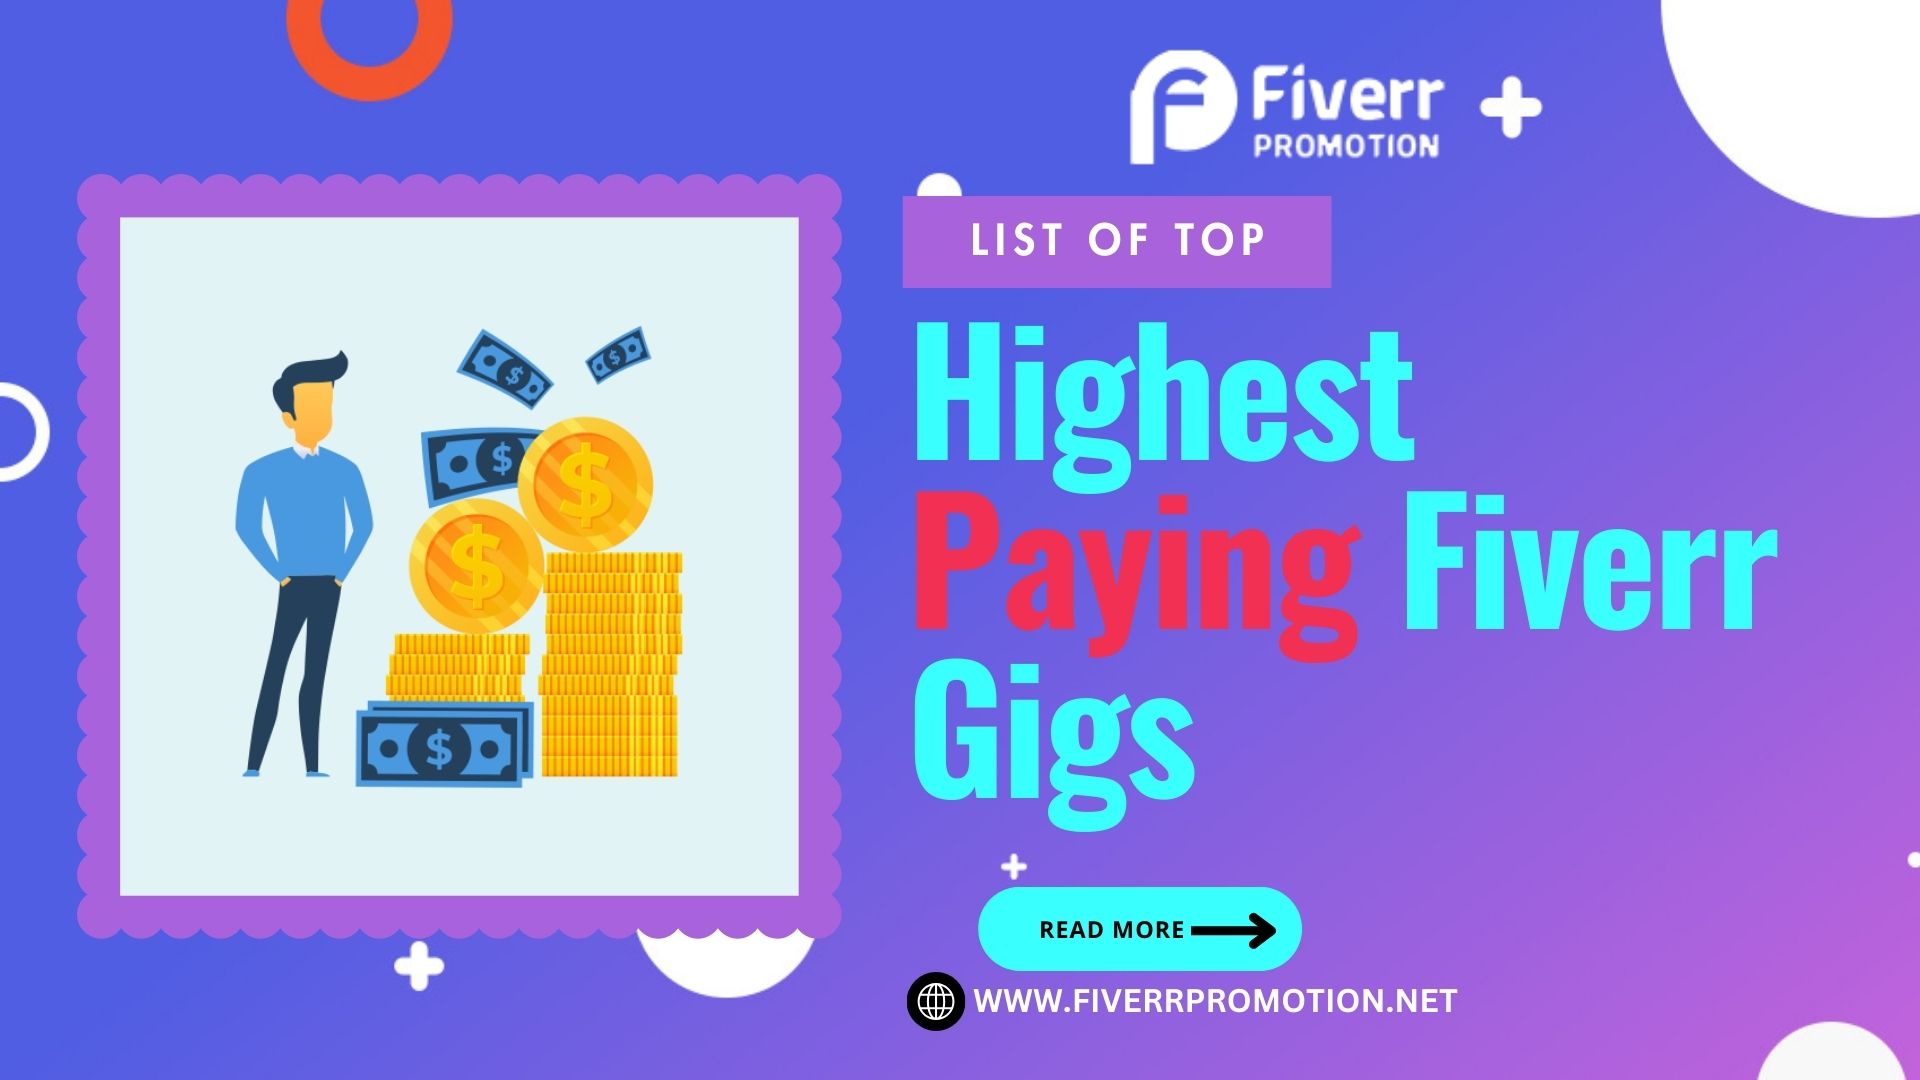 List of Top Highest Paying Fiverr Gigs